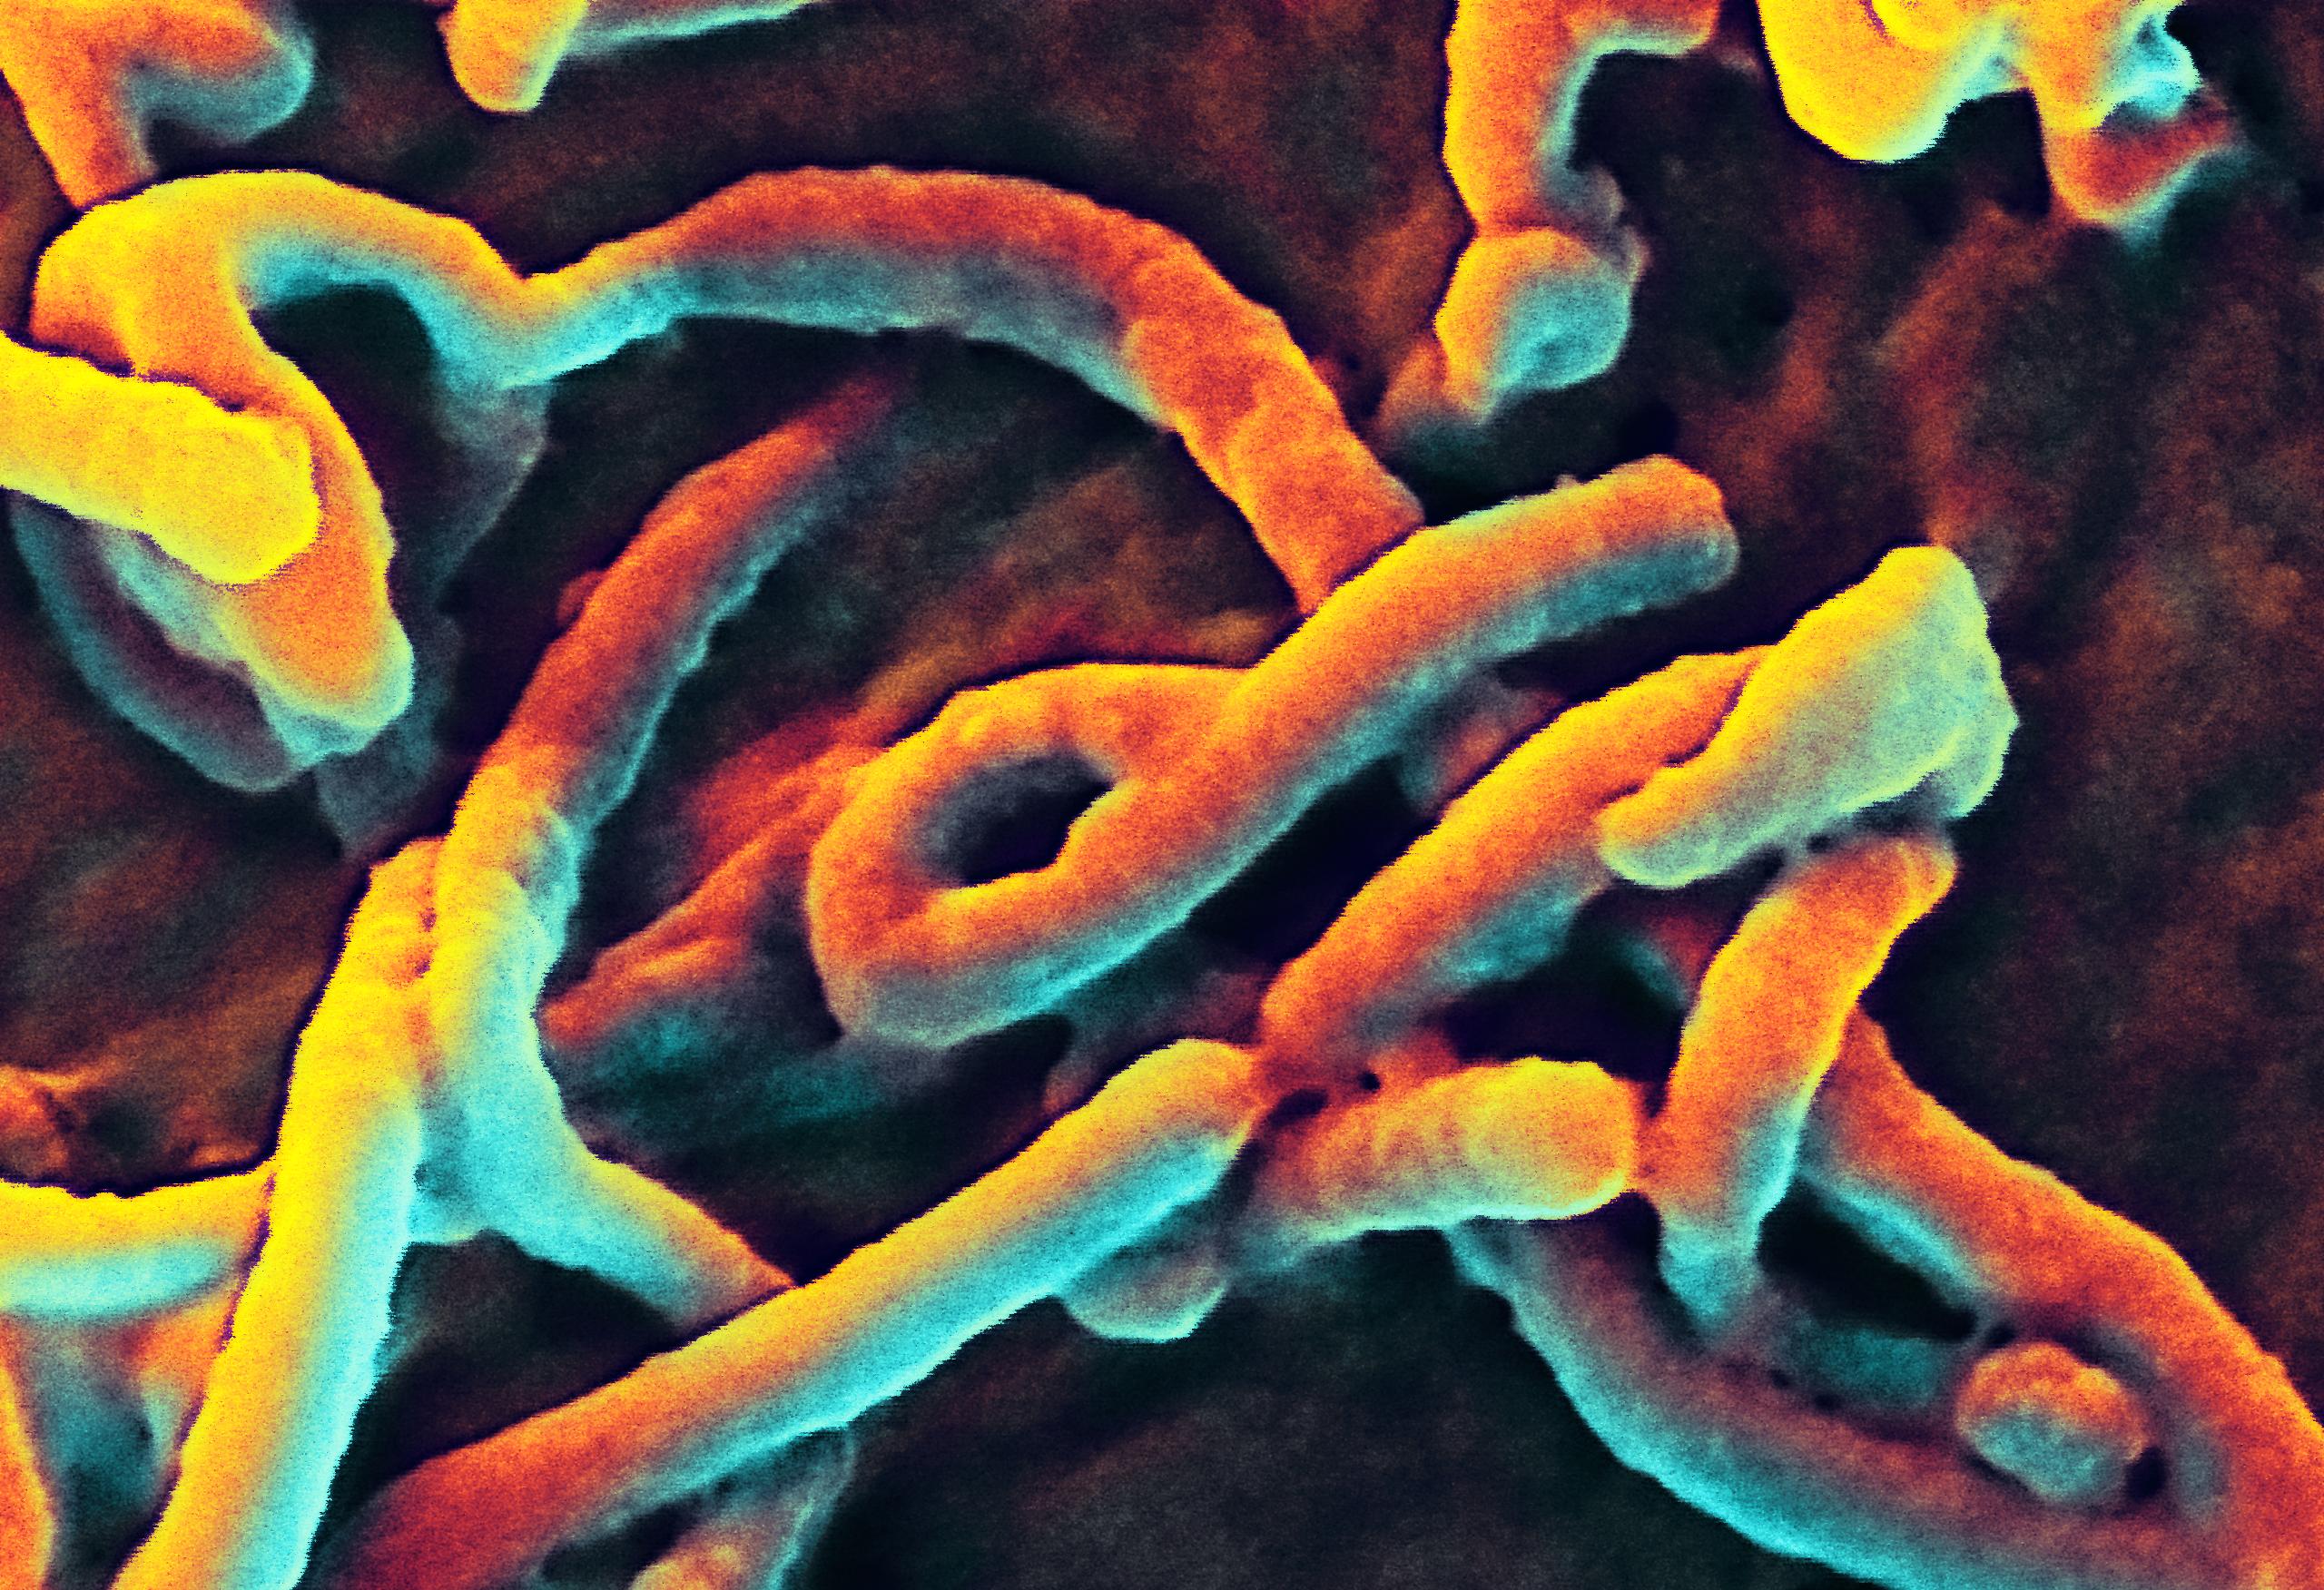 Scanning electron micrograph of the Ebola virus. Source: NIAID